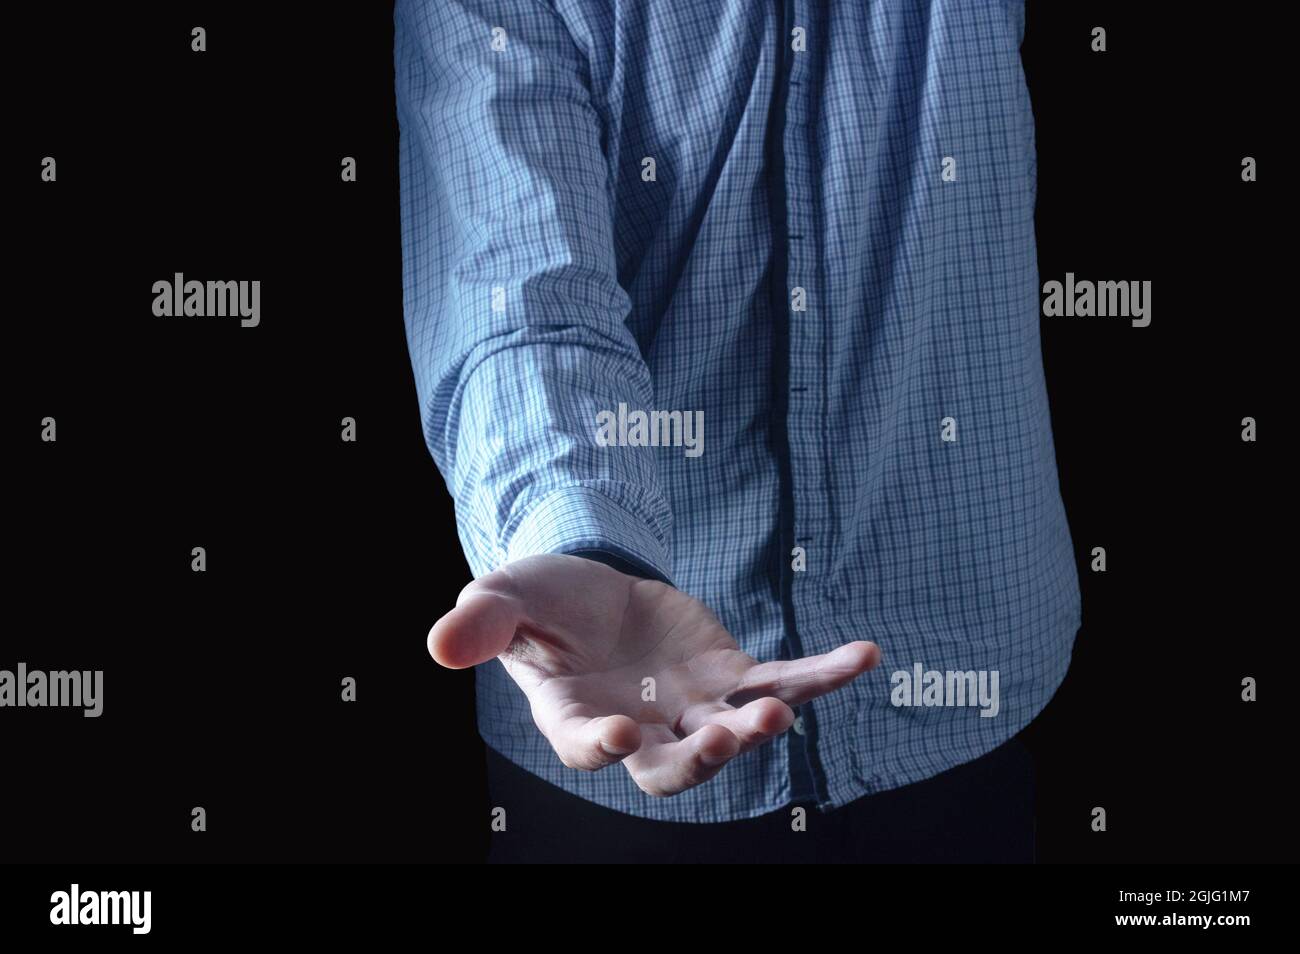 Outstretched hand of a man. A man in a plaid shirt. Hand with an open palm. Stock Photo